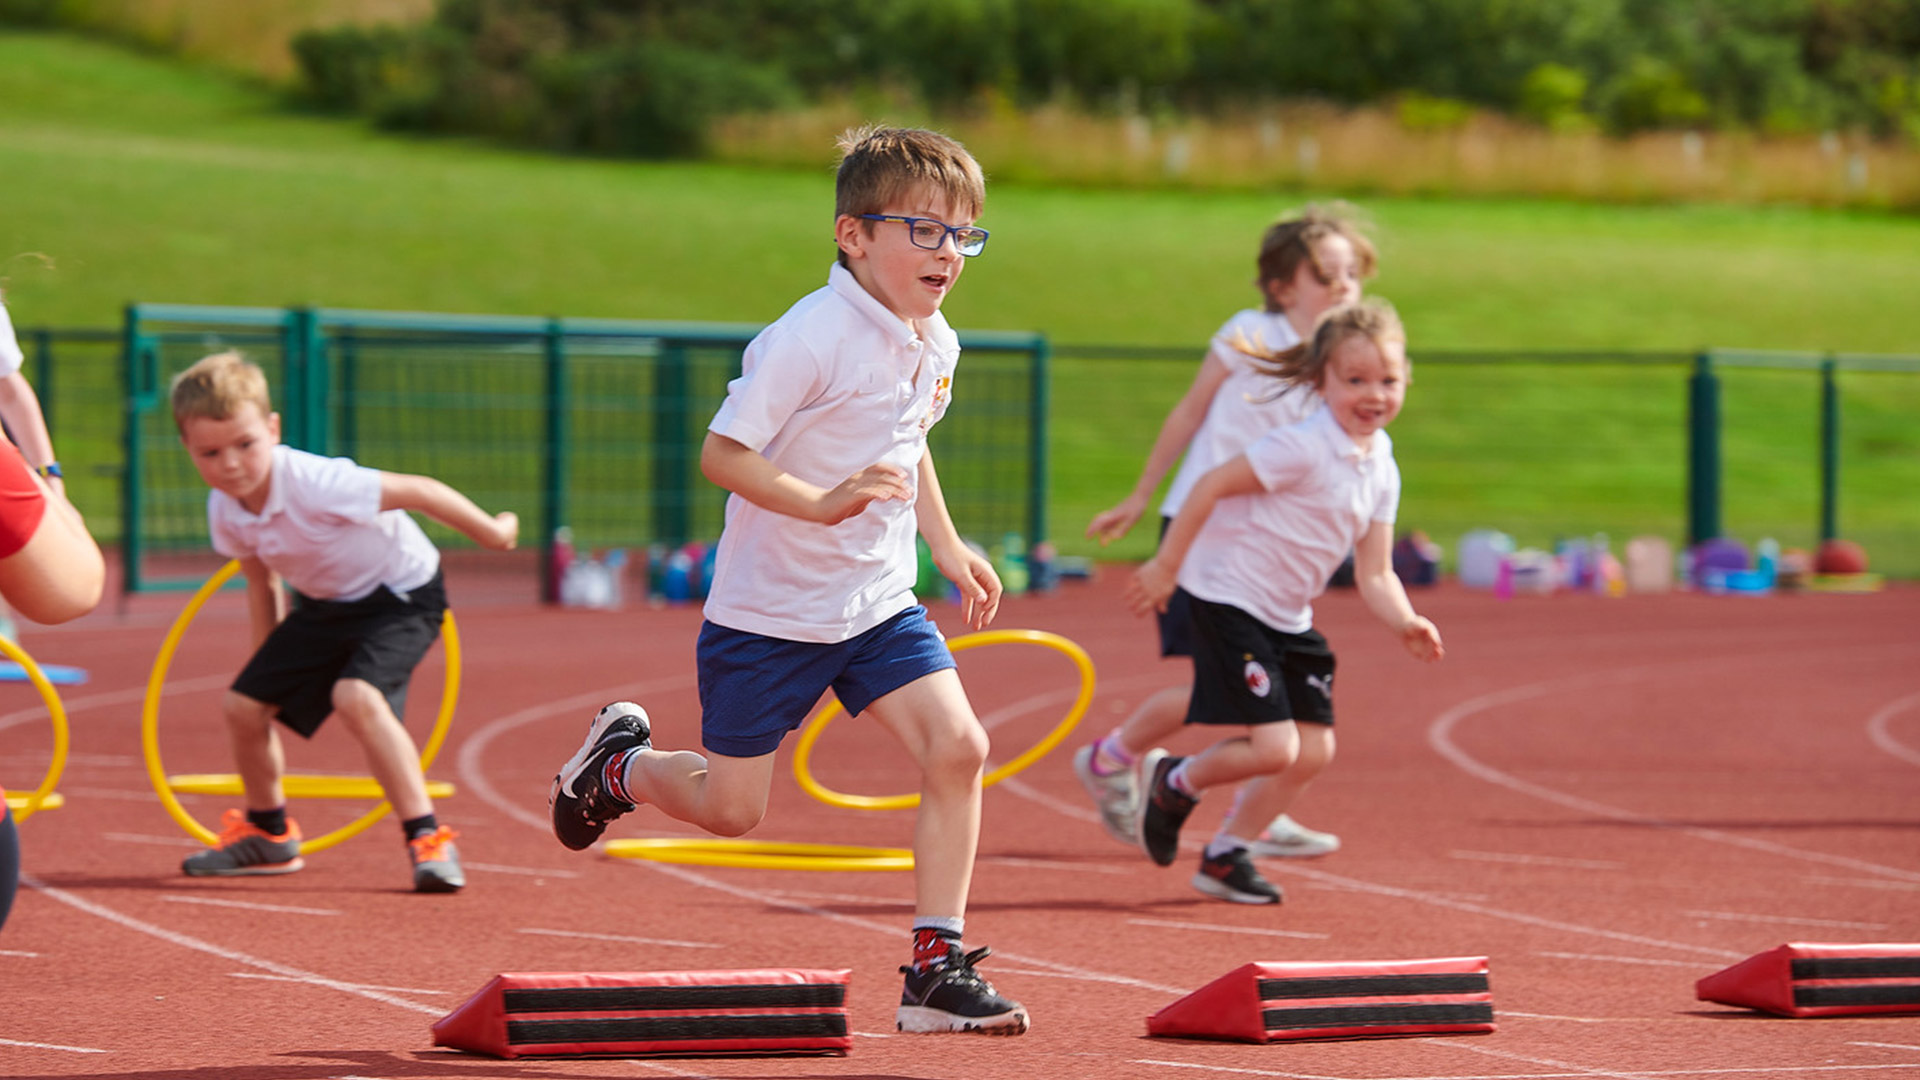 Children racing outside taking part in sports day